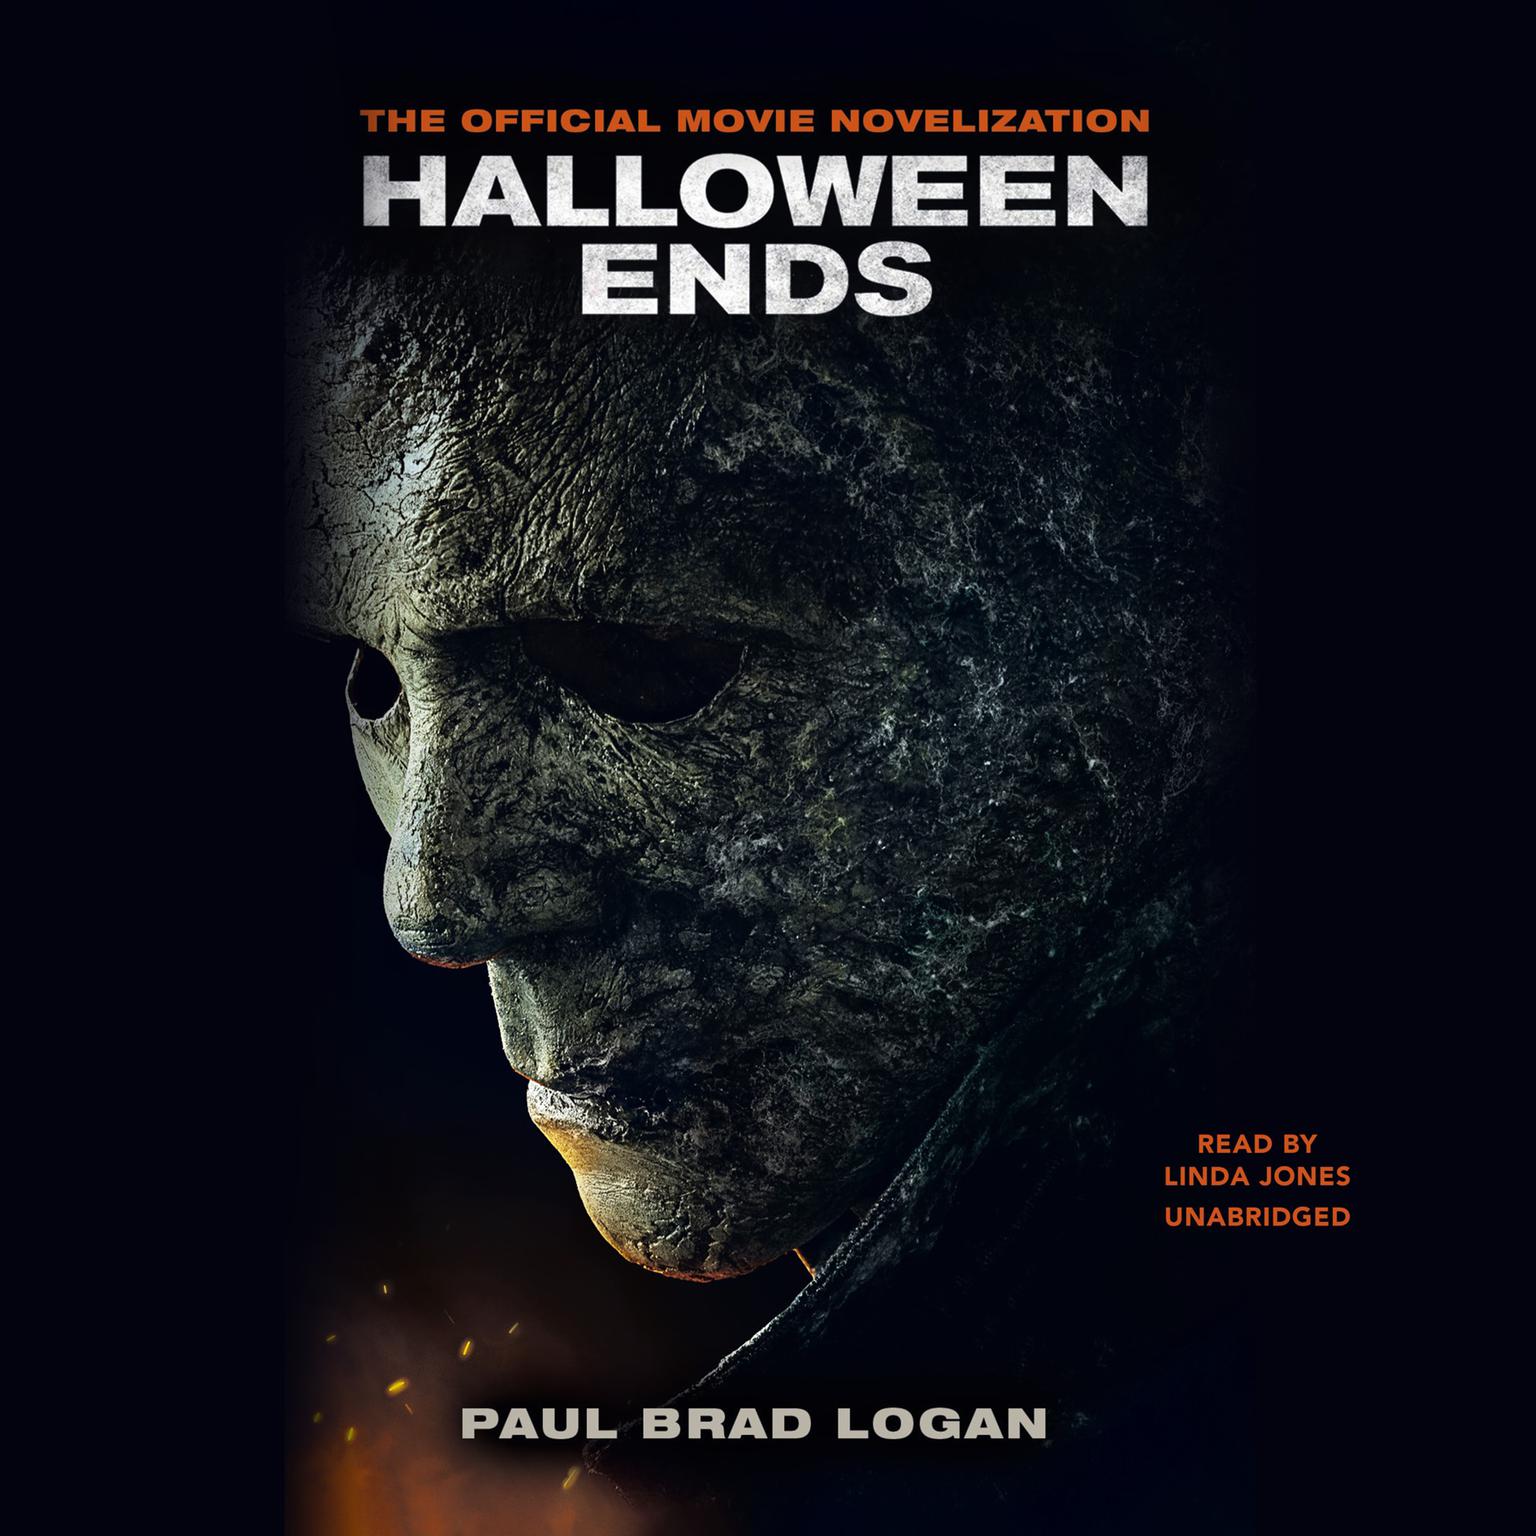 Halloween Ends: The Official Movie Novelization Audiobook, by Paul Brad Logan